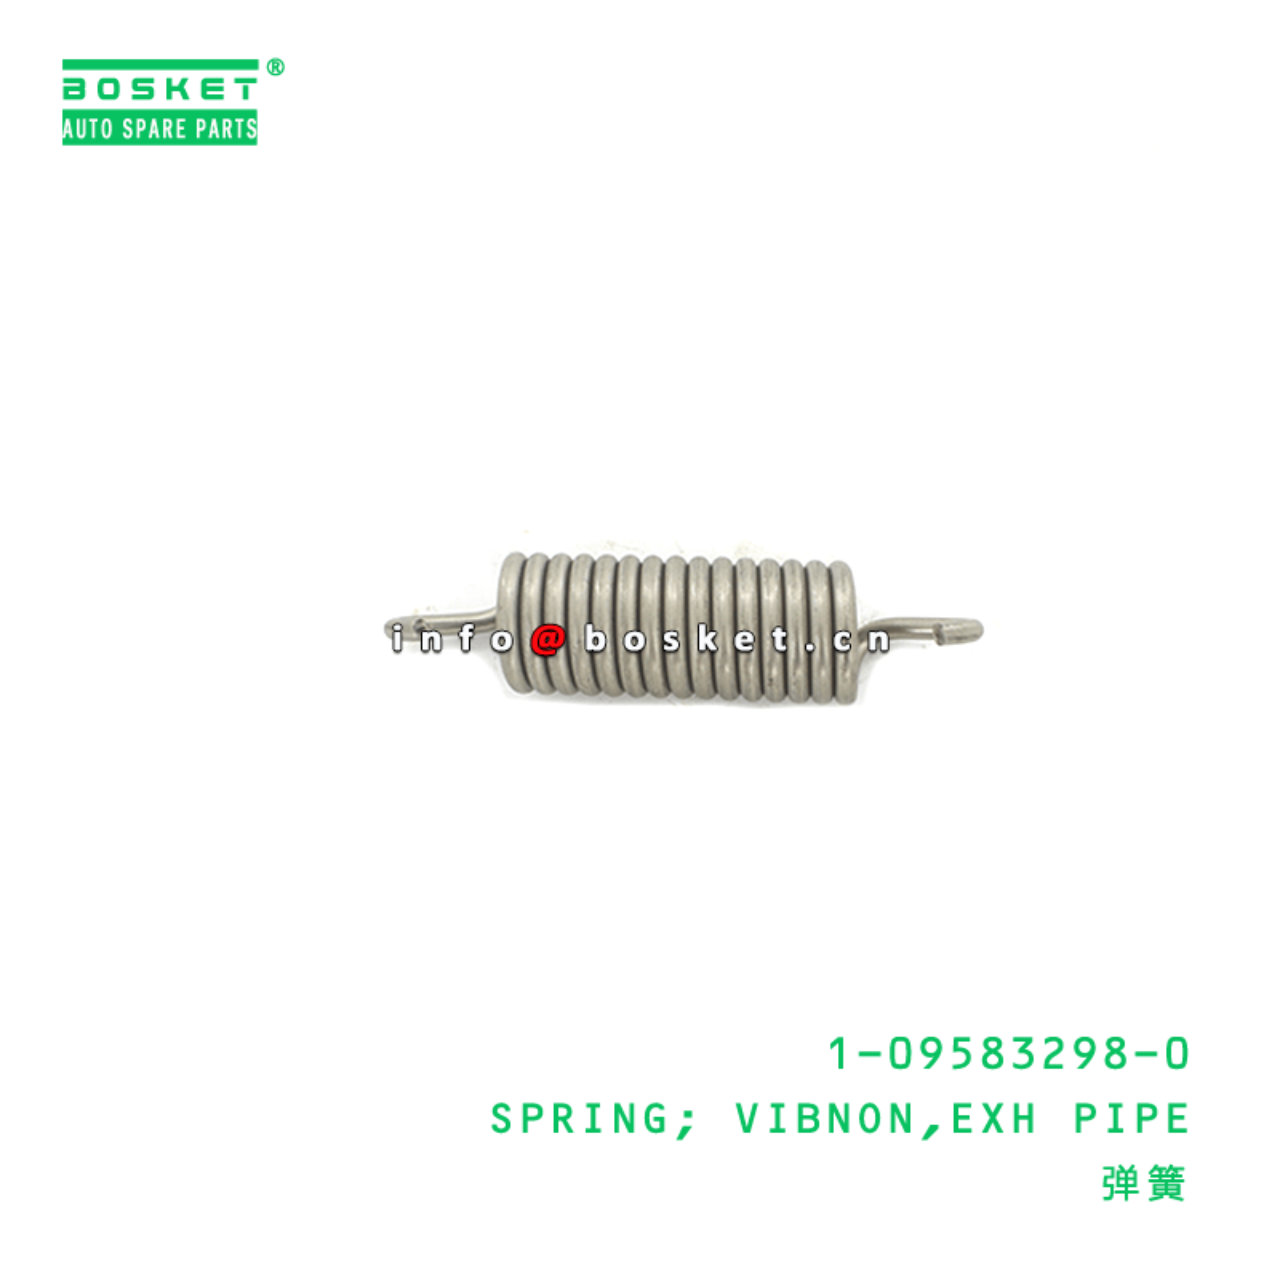 1-09583298-0 Exhaust Pipe Vibnon Spring 1095832980 Suitable for 